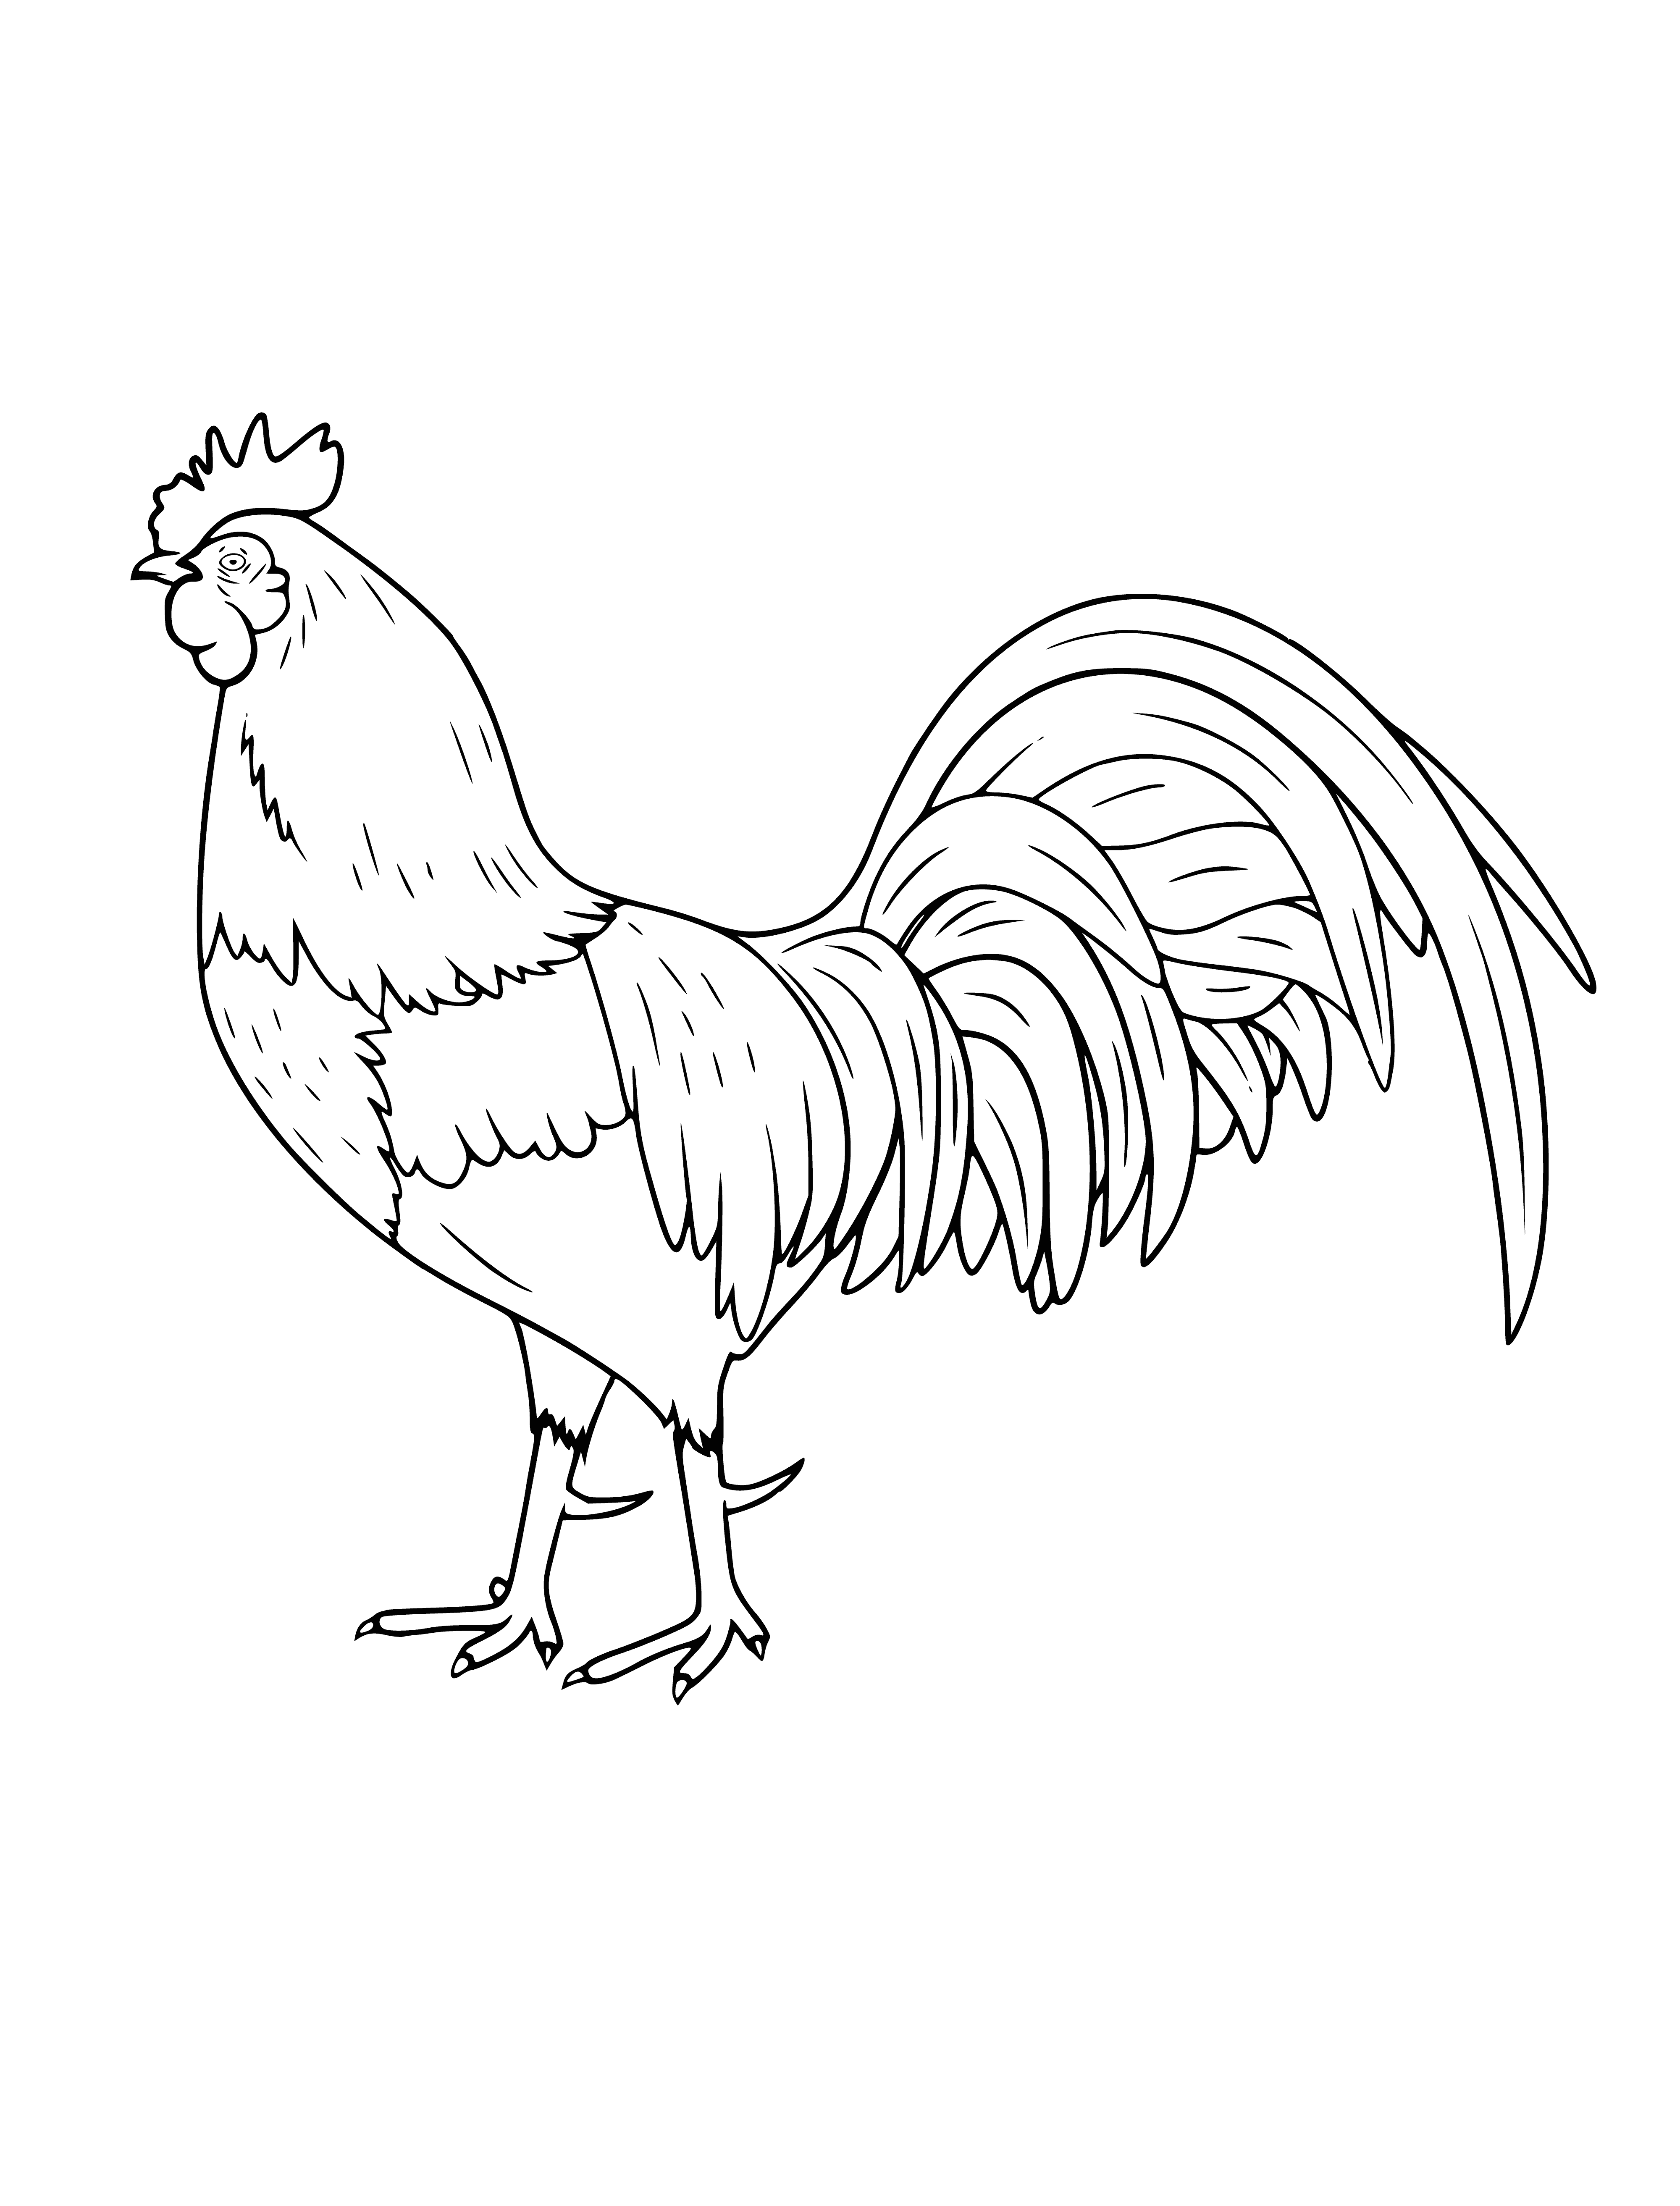 coloring page: Rooster is a big white bird w/ yellow beak & red comb & tail feather; standing on a fence.